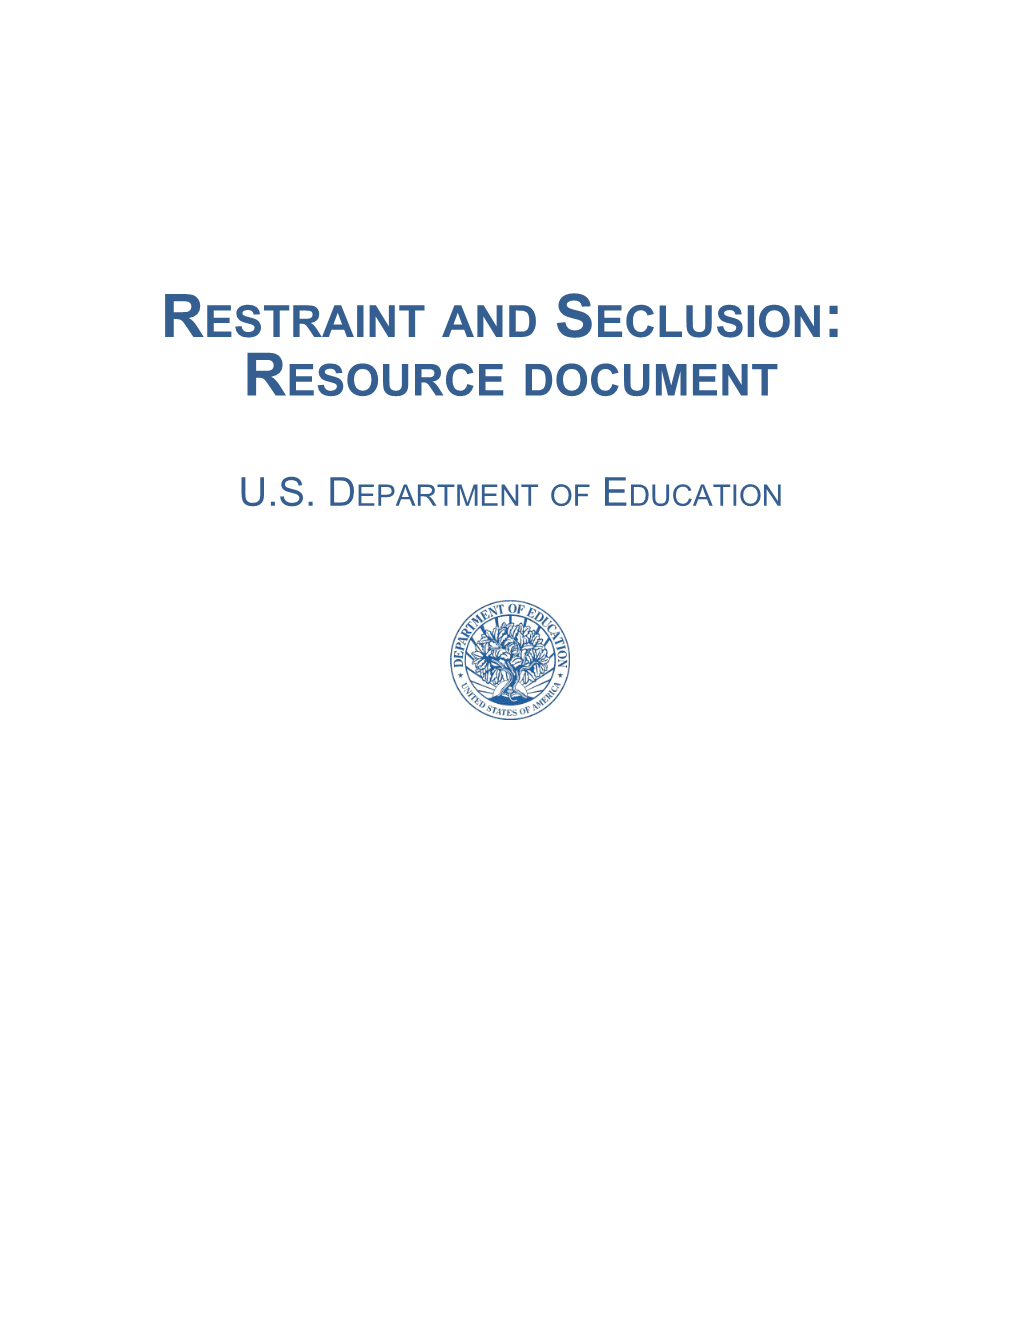 Restraint and Seclusion: Resource Document (MS Word)